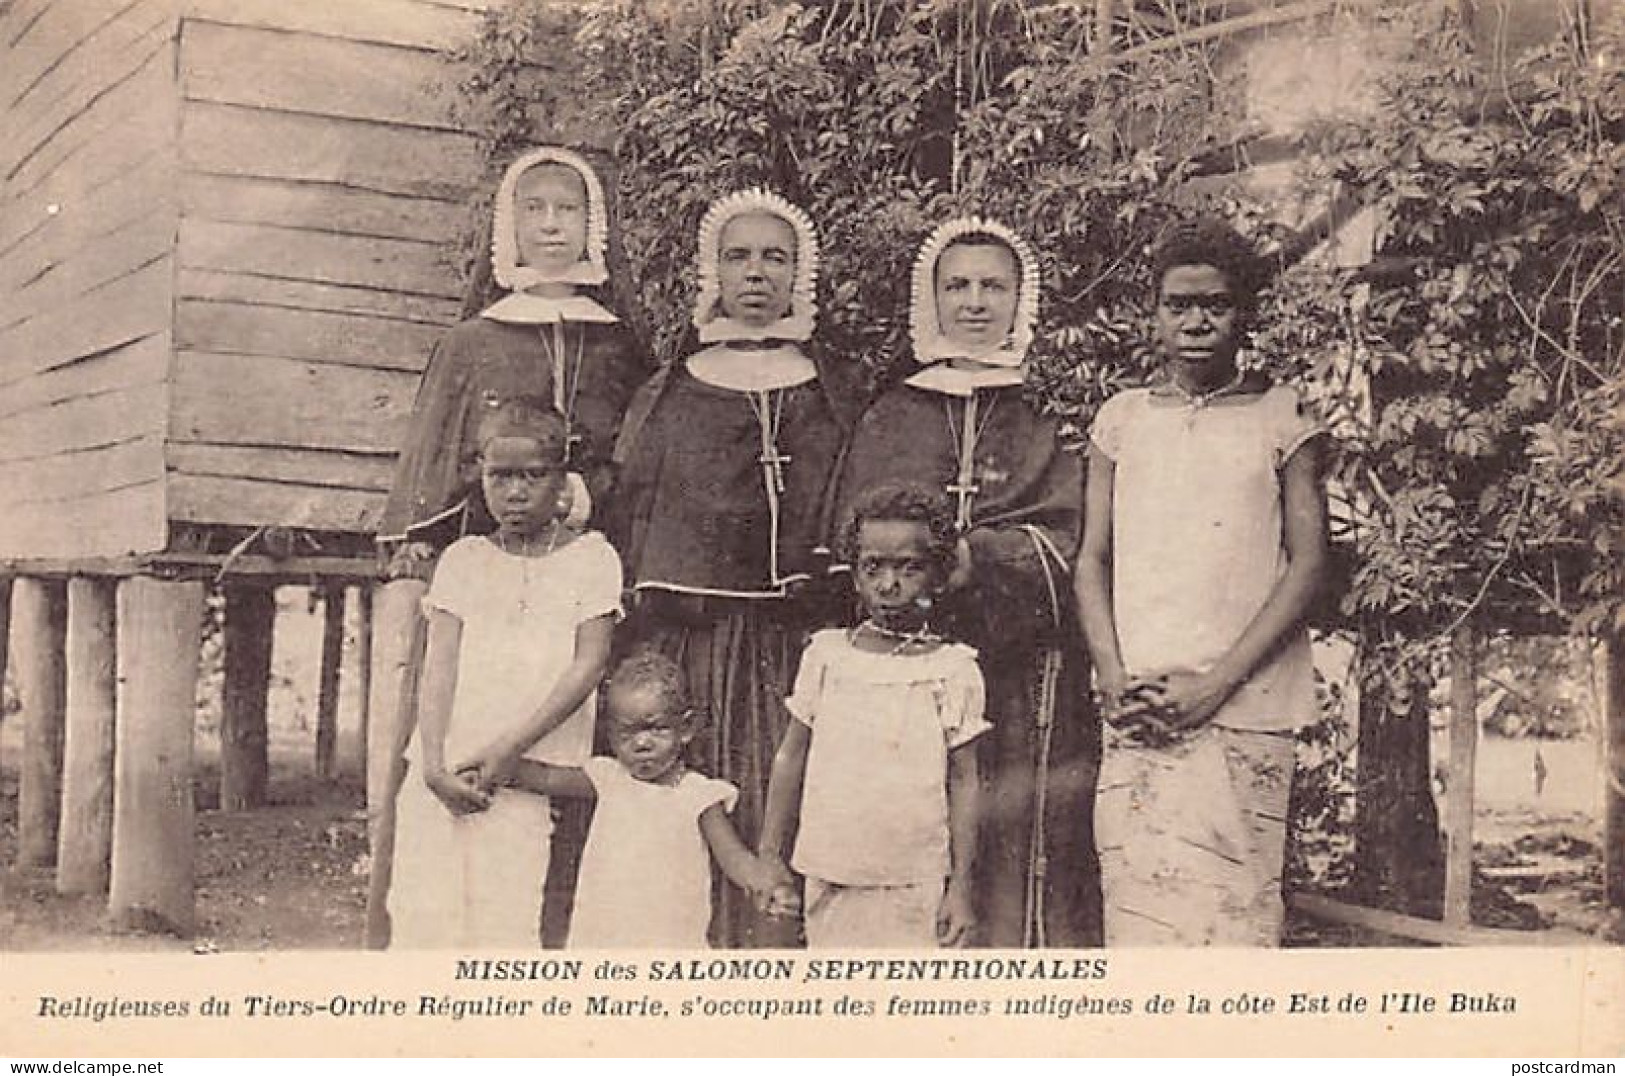 Papua New Guinea - BUKA ISLAND - Nuns Of The Third Order Regular Of Mary Caring For Indigenous Women On The East Coast O - Papouasie-Nouvelle-Guinée